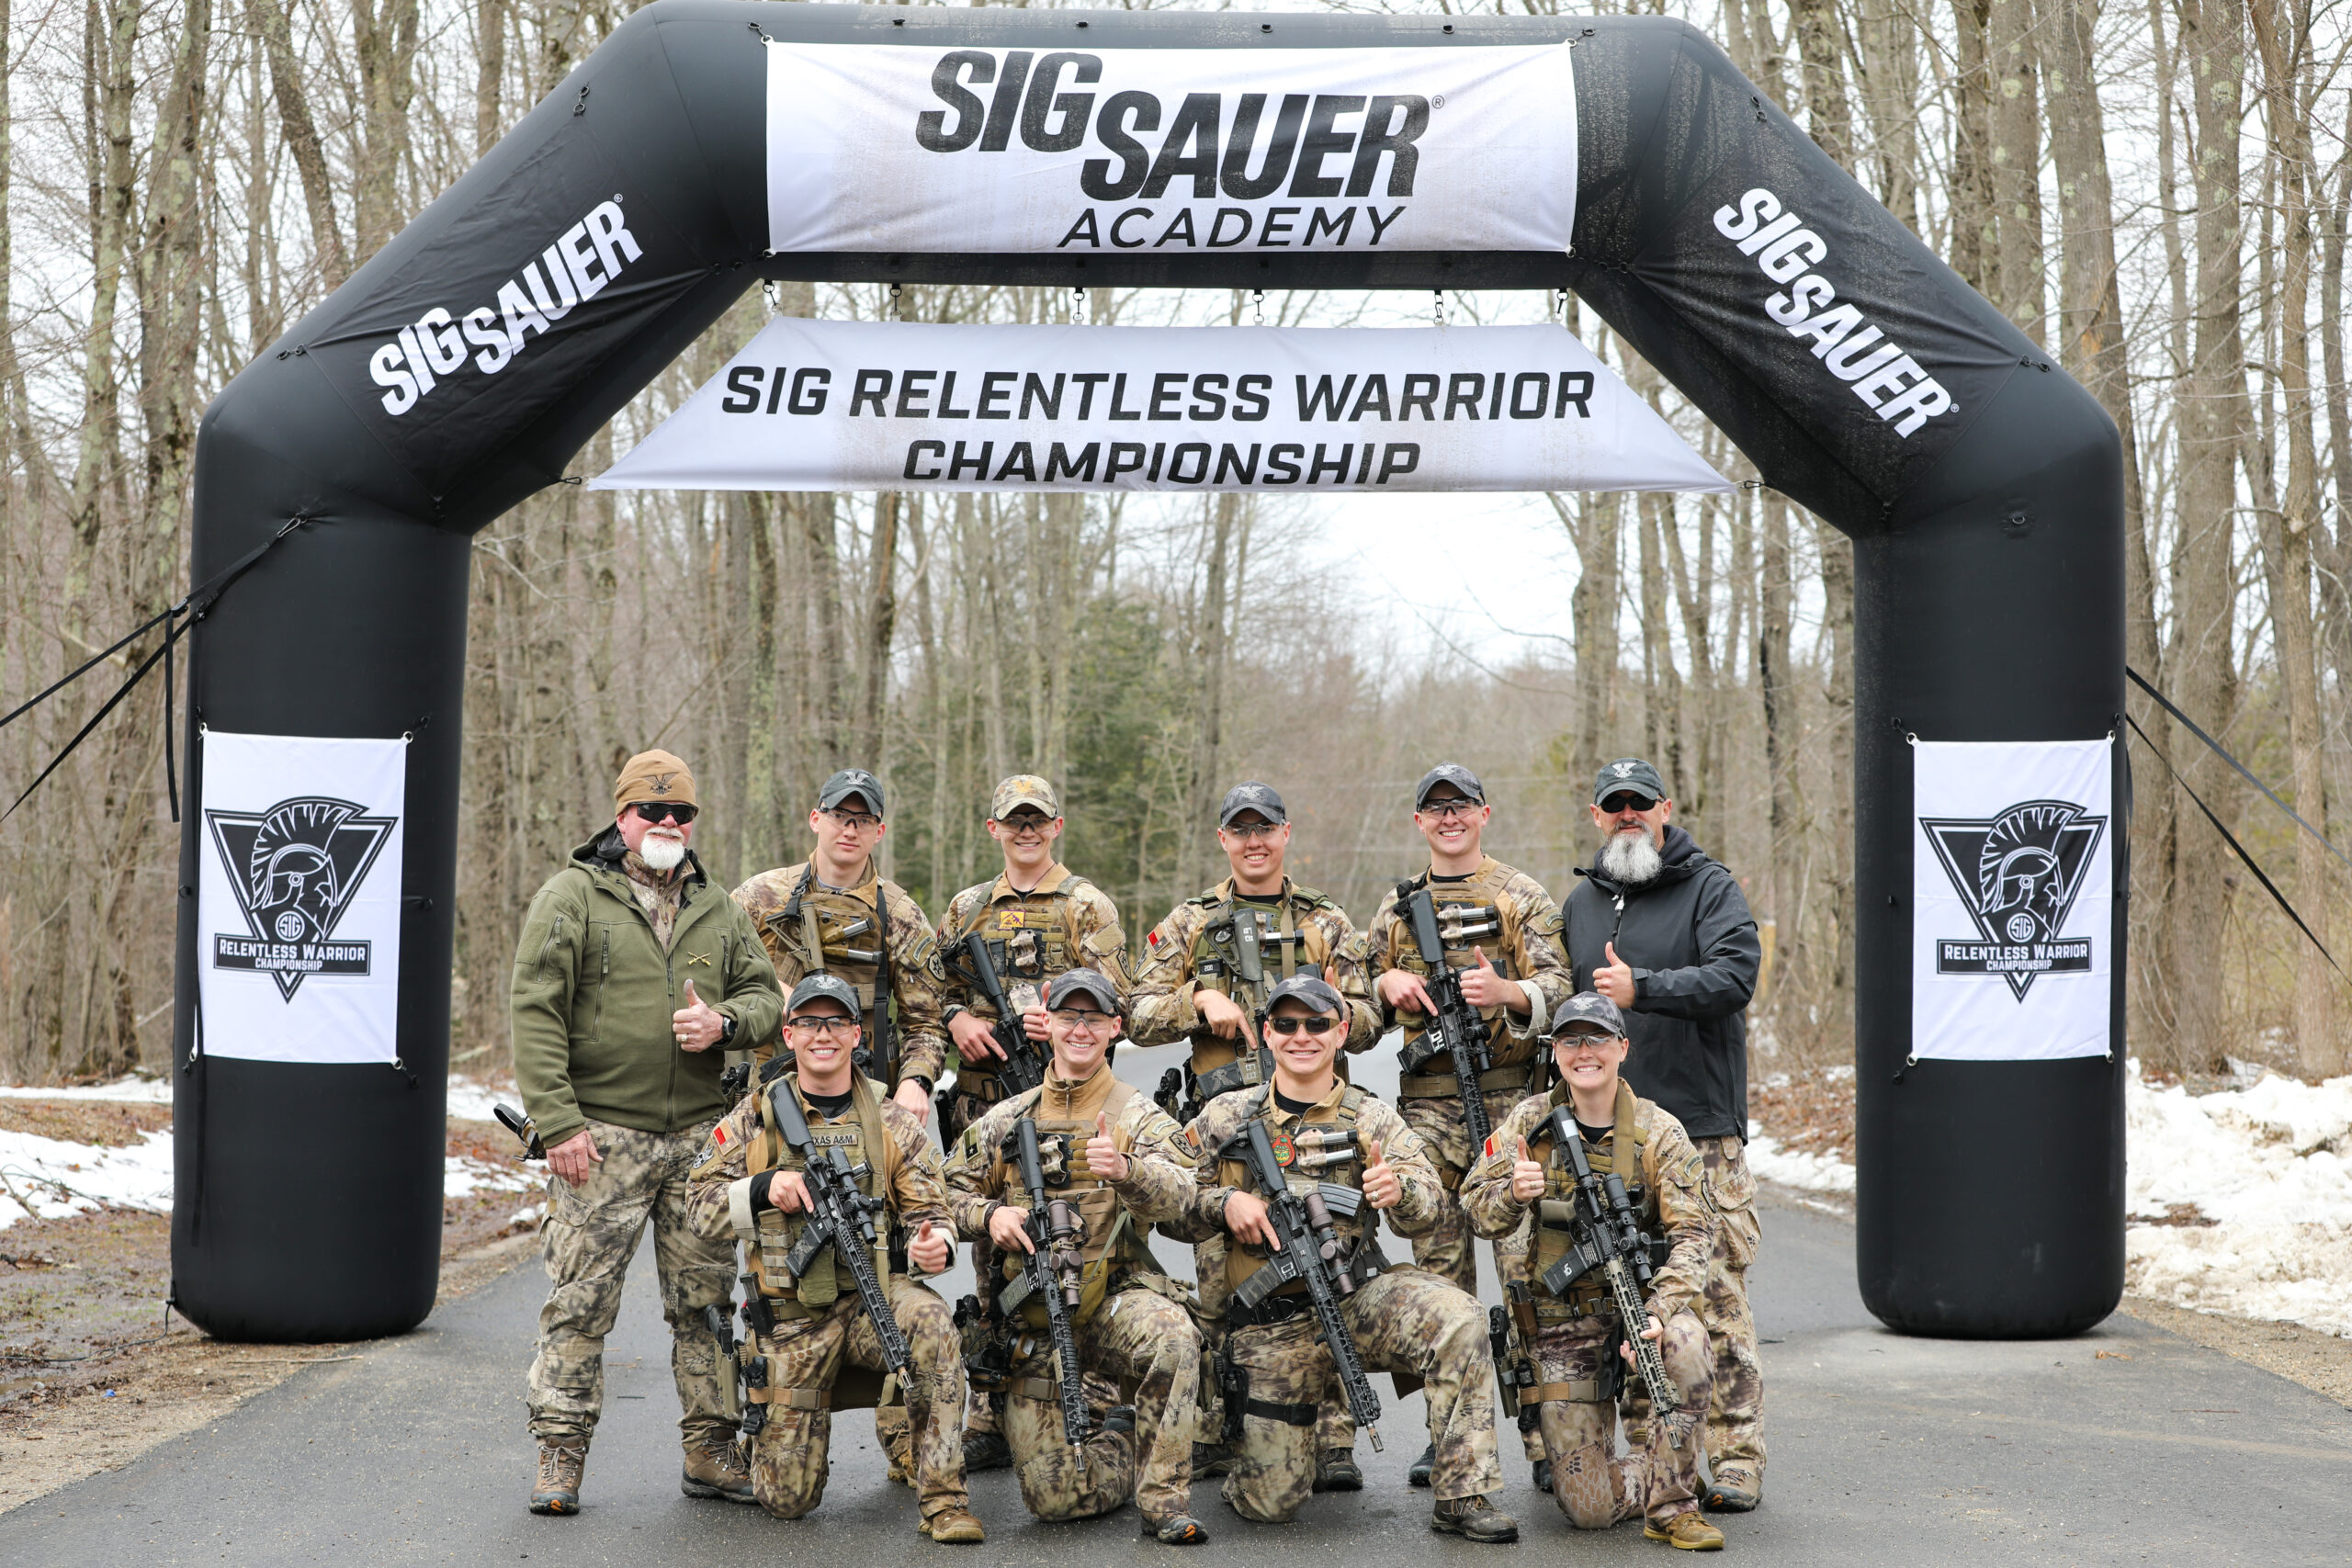 CCMU team at the entrance of Sig Sauer Relentless Warrior Championship.